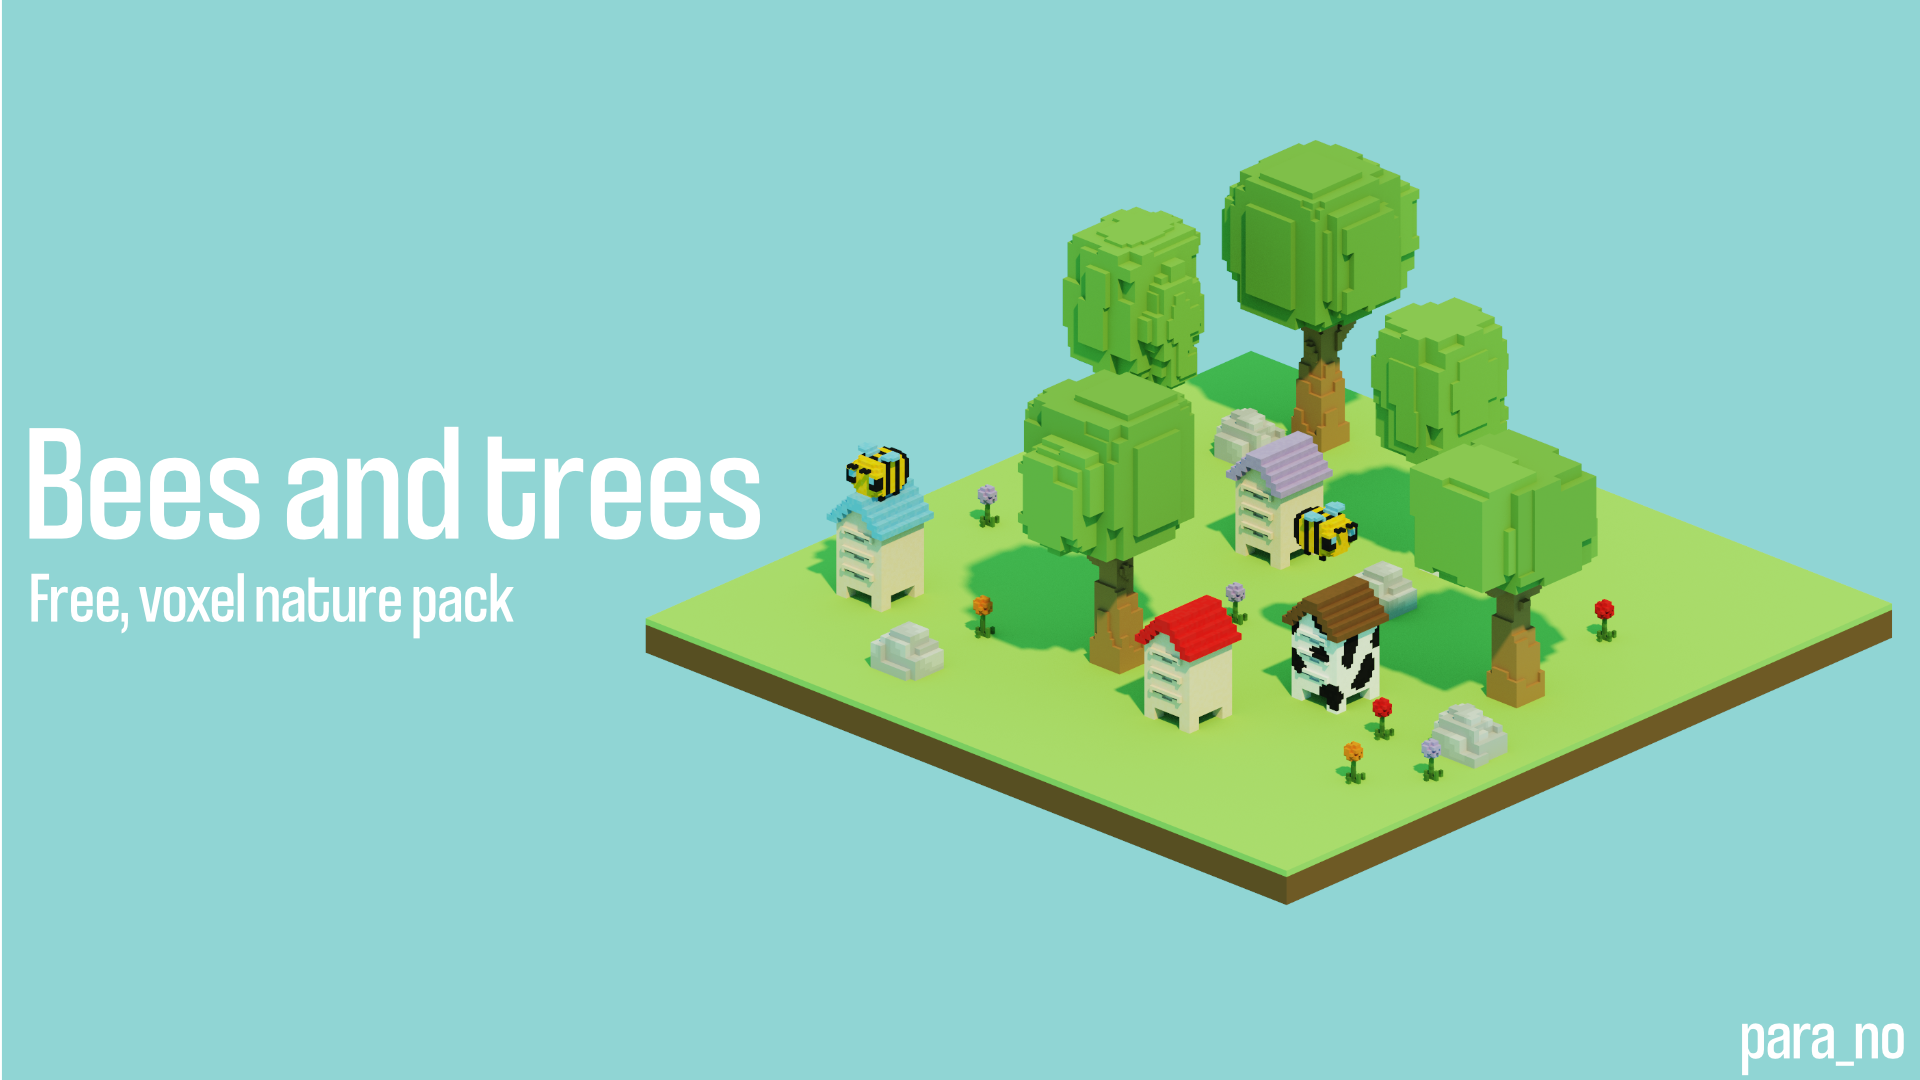 Bees and trees - Free, voxel nature pack